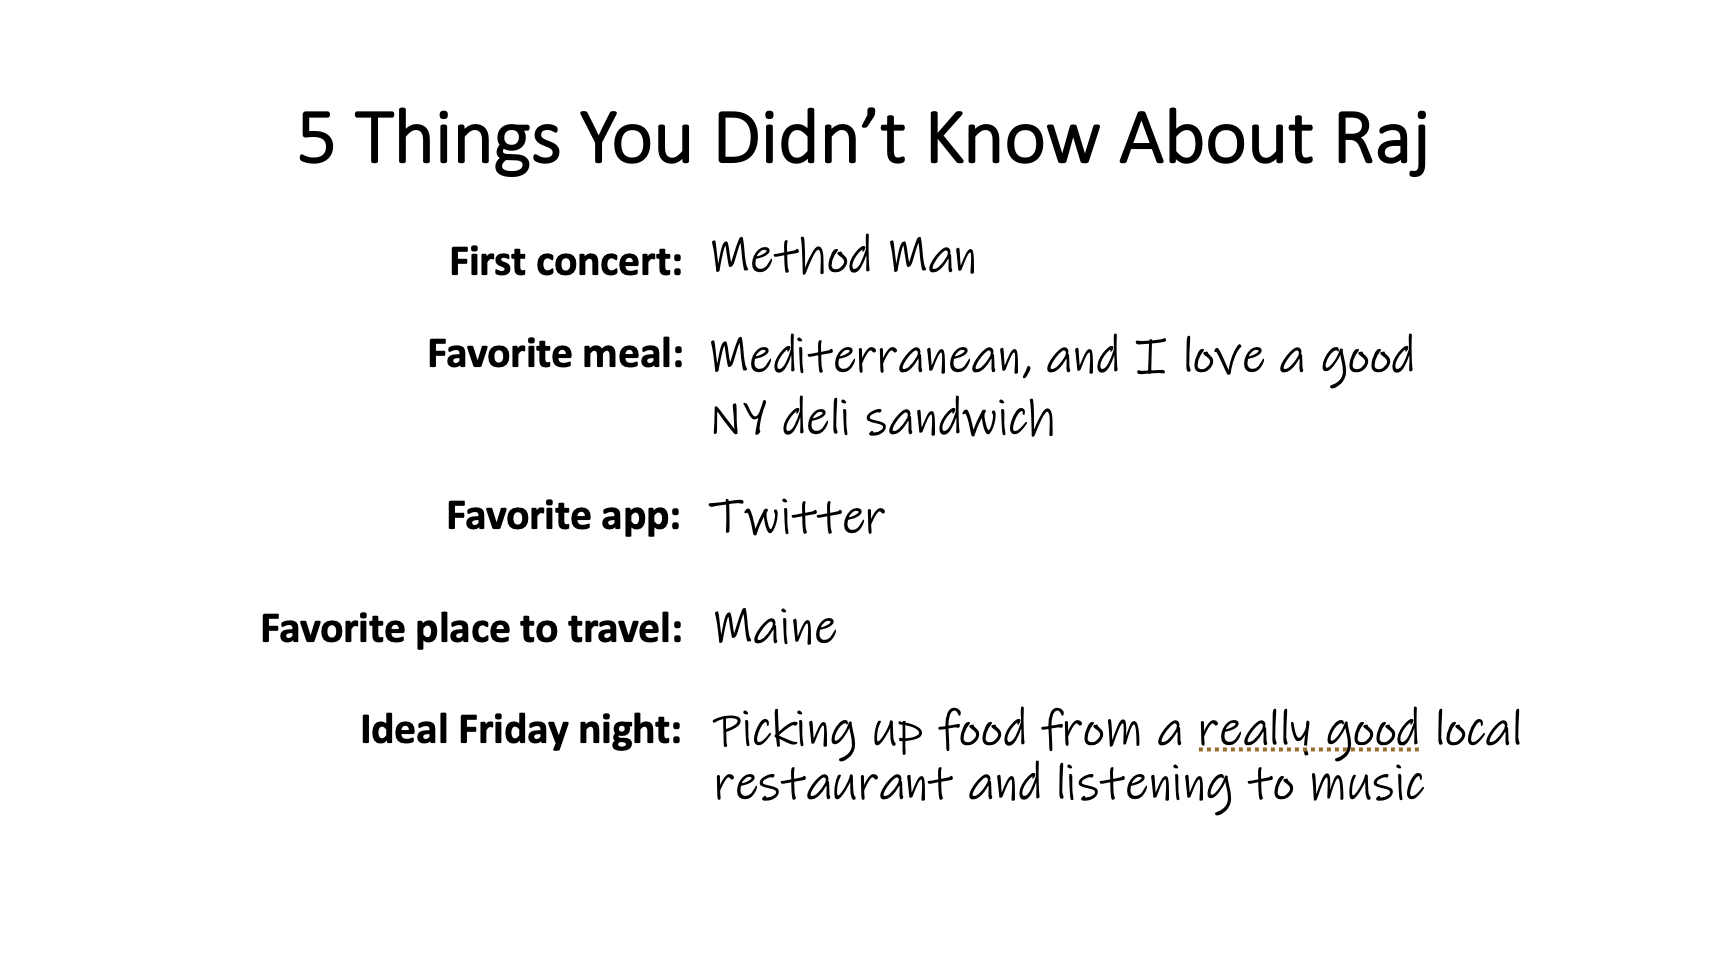 Text: 5 Things You Didn't Know About Raj; First concert: Method Man; Favorite meal: Mediterranean, and I love a good NY deli sandwich; Favorite app: Twitter; Ideal Friday night: Picking up food from a really good local restaurant and listening to music; Favorite place to travel: Maine